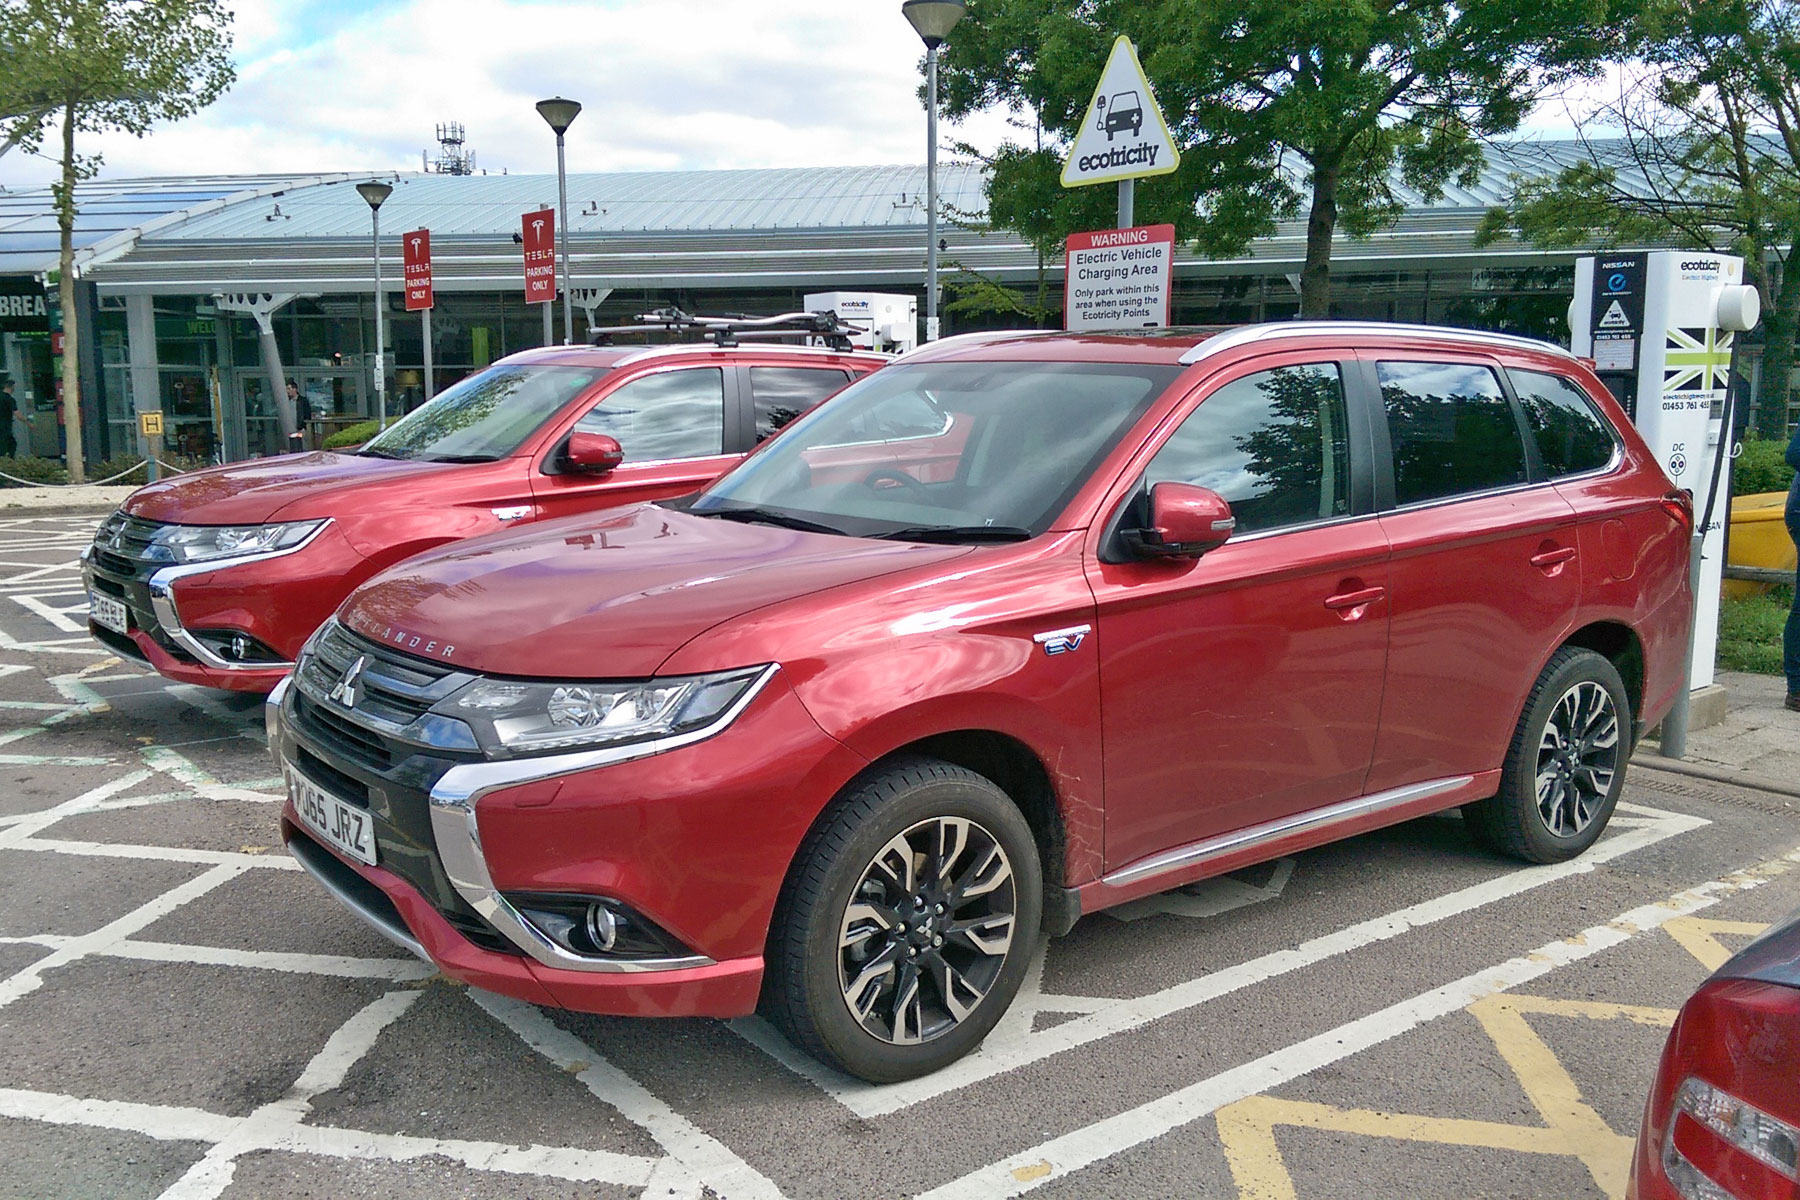 Ecotricity blames £6 charge on Mitsubishi Outlander PHEVs ‘clogging up’ network